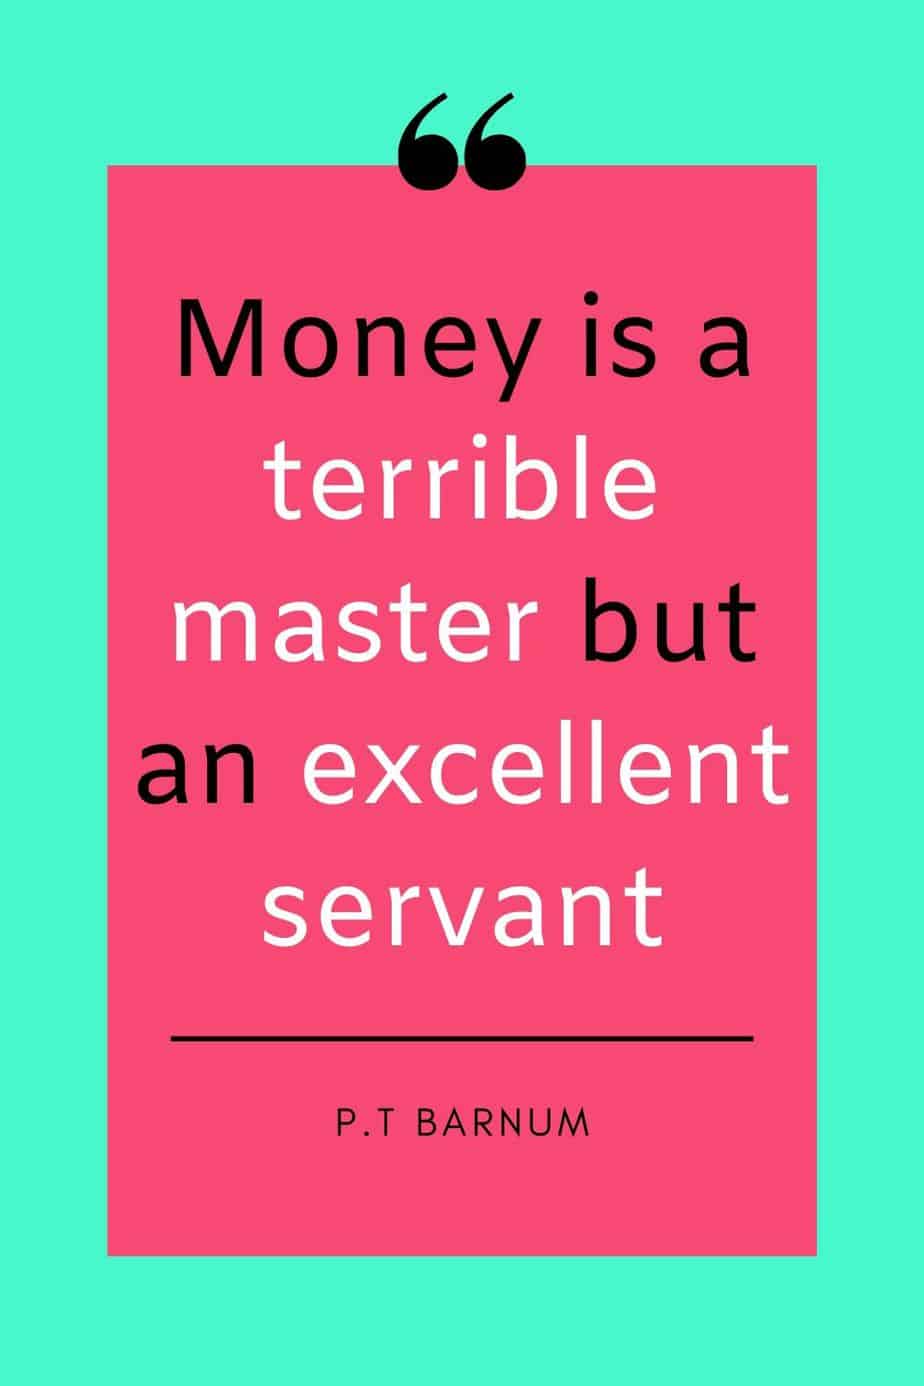 Money is a terrible master but an excellent servant